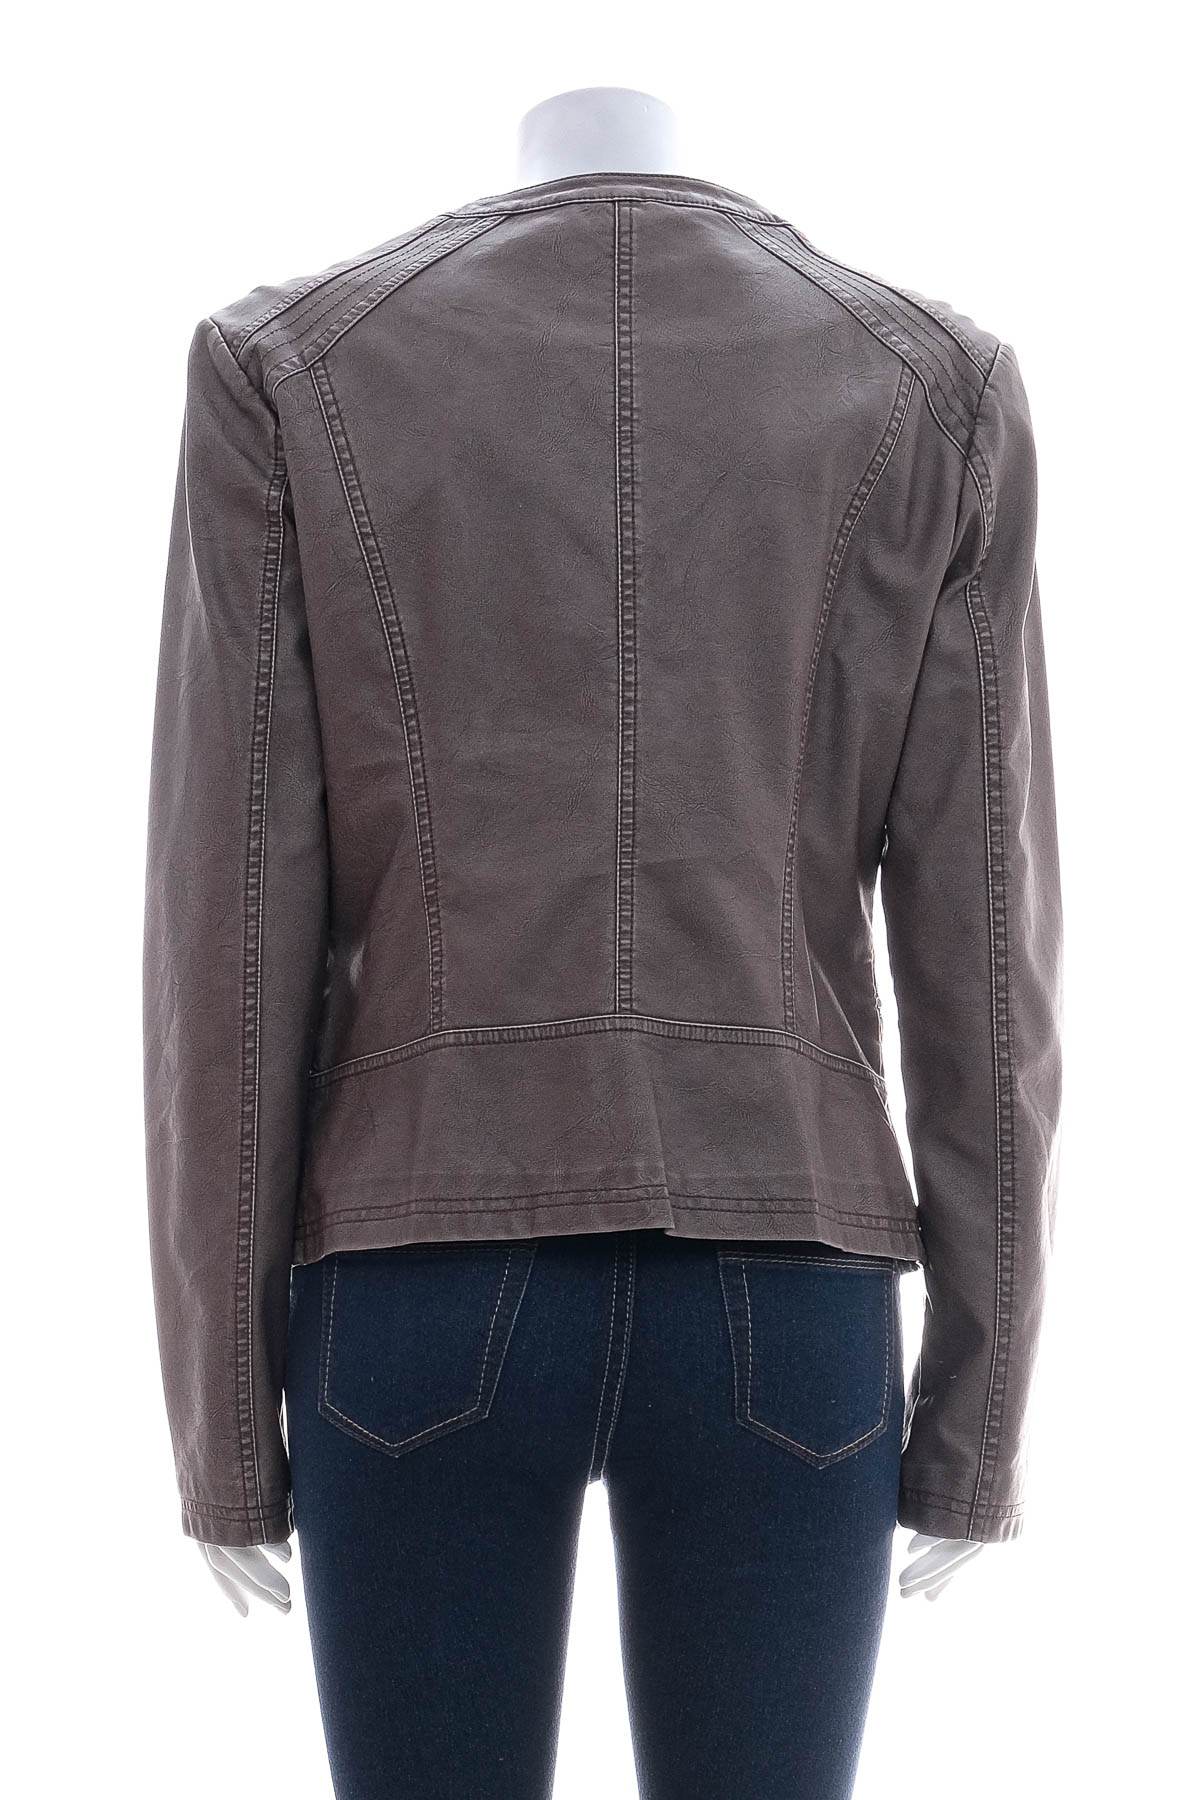 Women's leather jacket - Orsay - 1